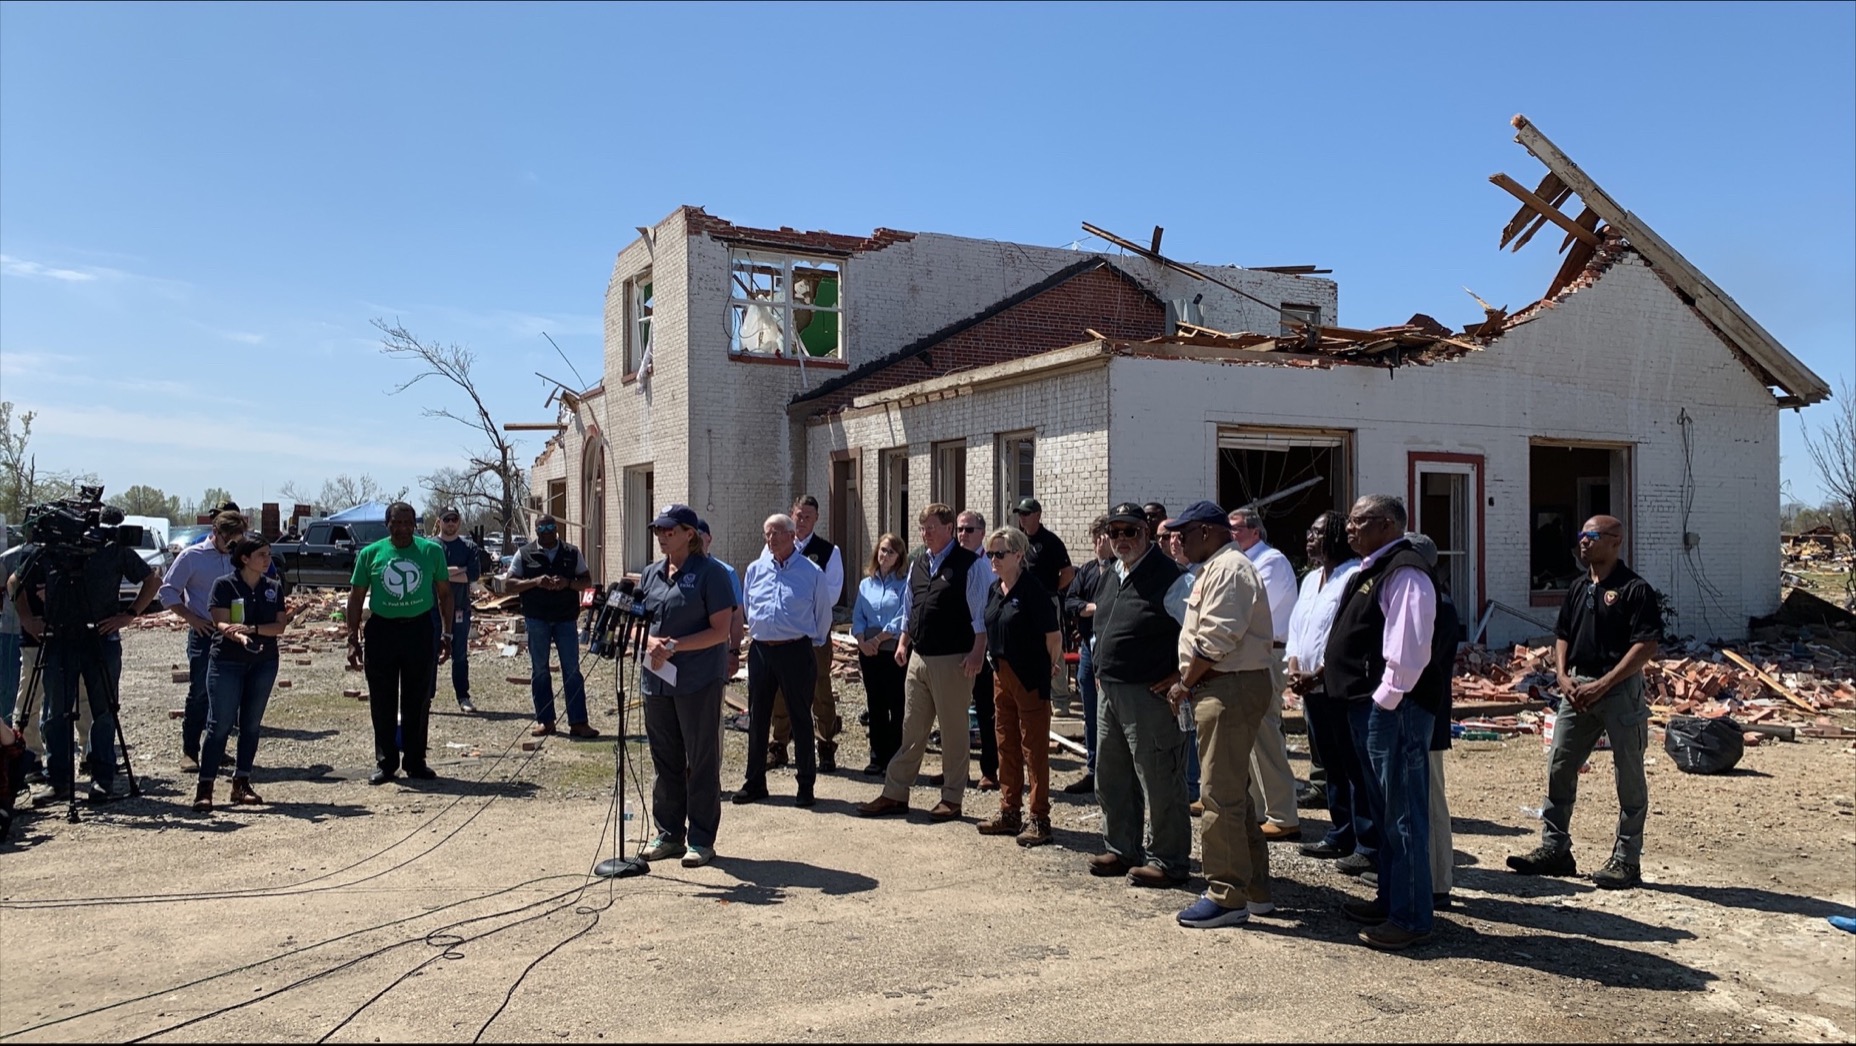 FEMA Administrator Deanne Criswell provides an update on FEMA’s response and recovery efforts following the recent tornadoes that impacted Mississippi at a press conference with other federal, state and local officials.